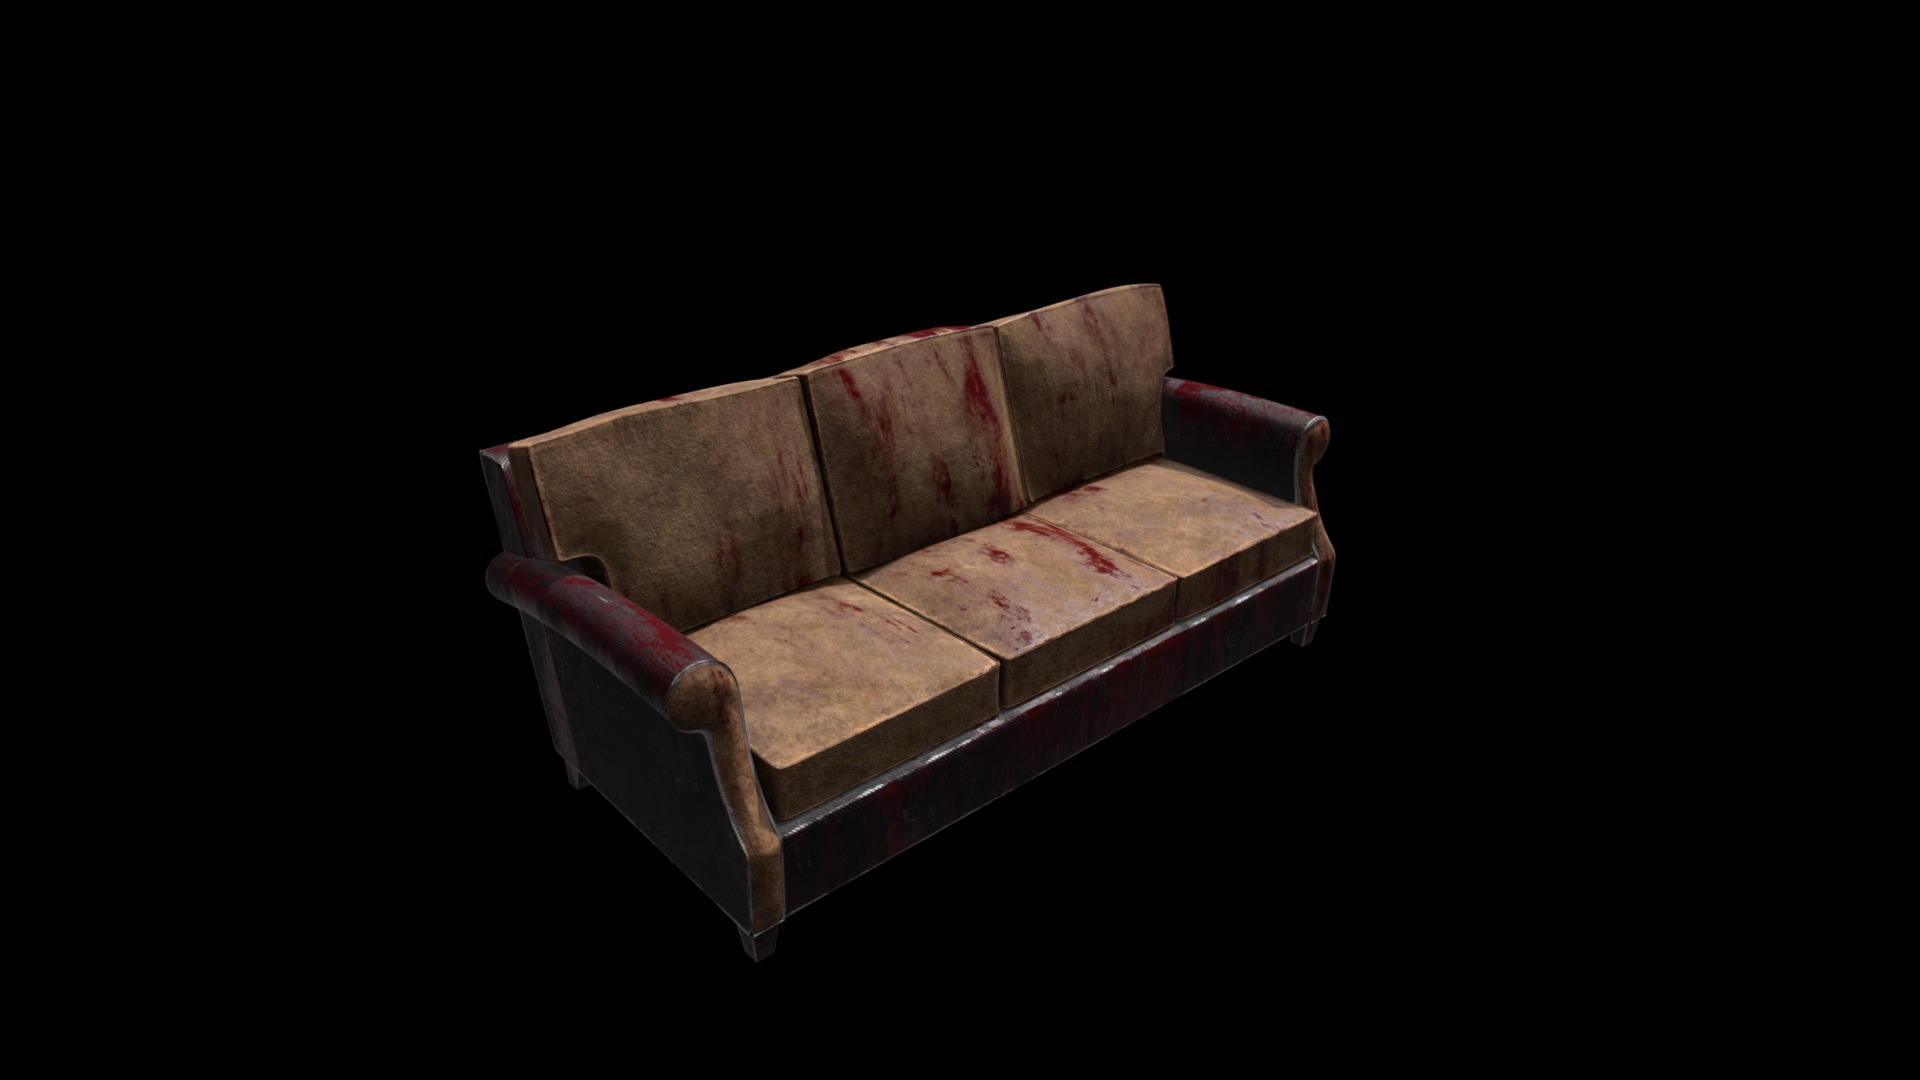 3D model Bloody Horror Sofa - This is a 3D model of the Bloody Horror Sofa. The 3D model is about a brown leather couch.